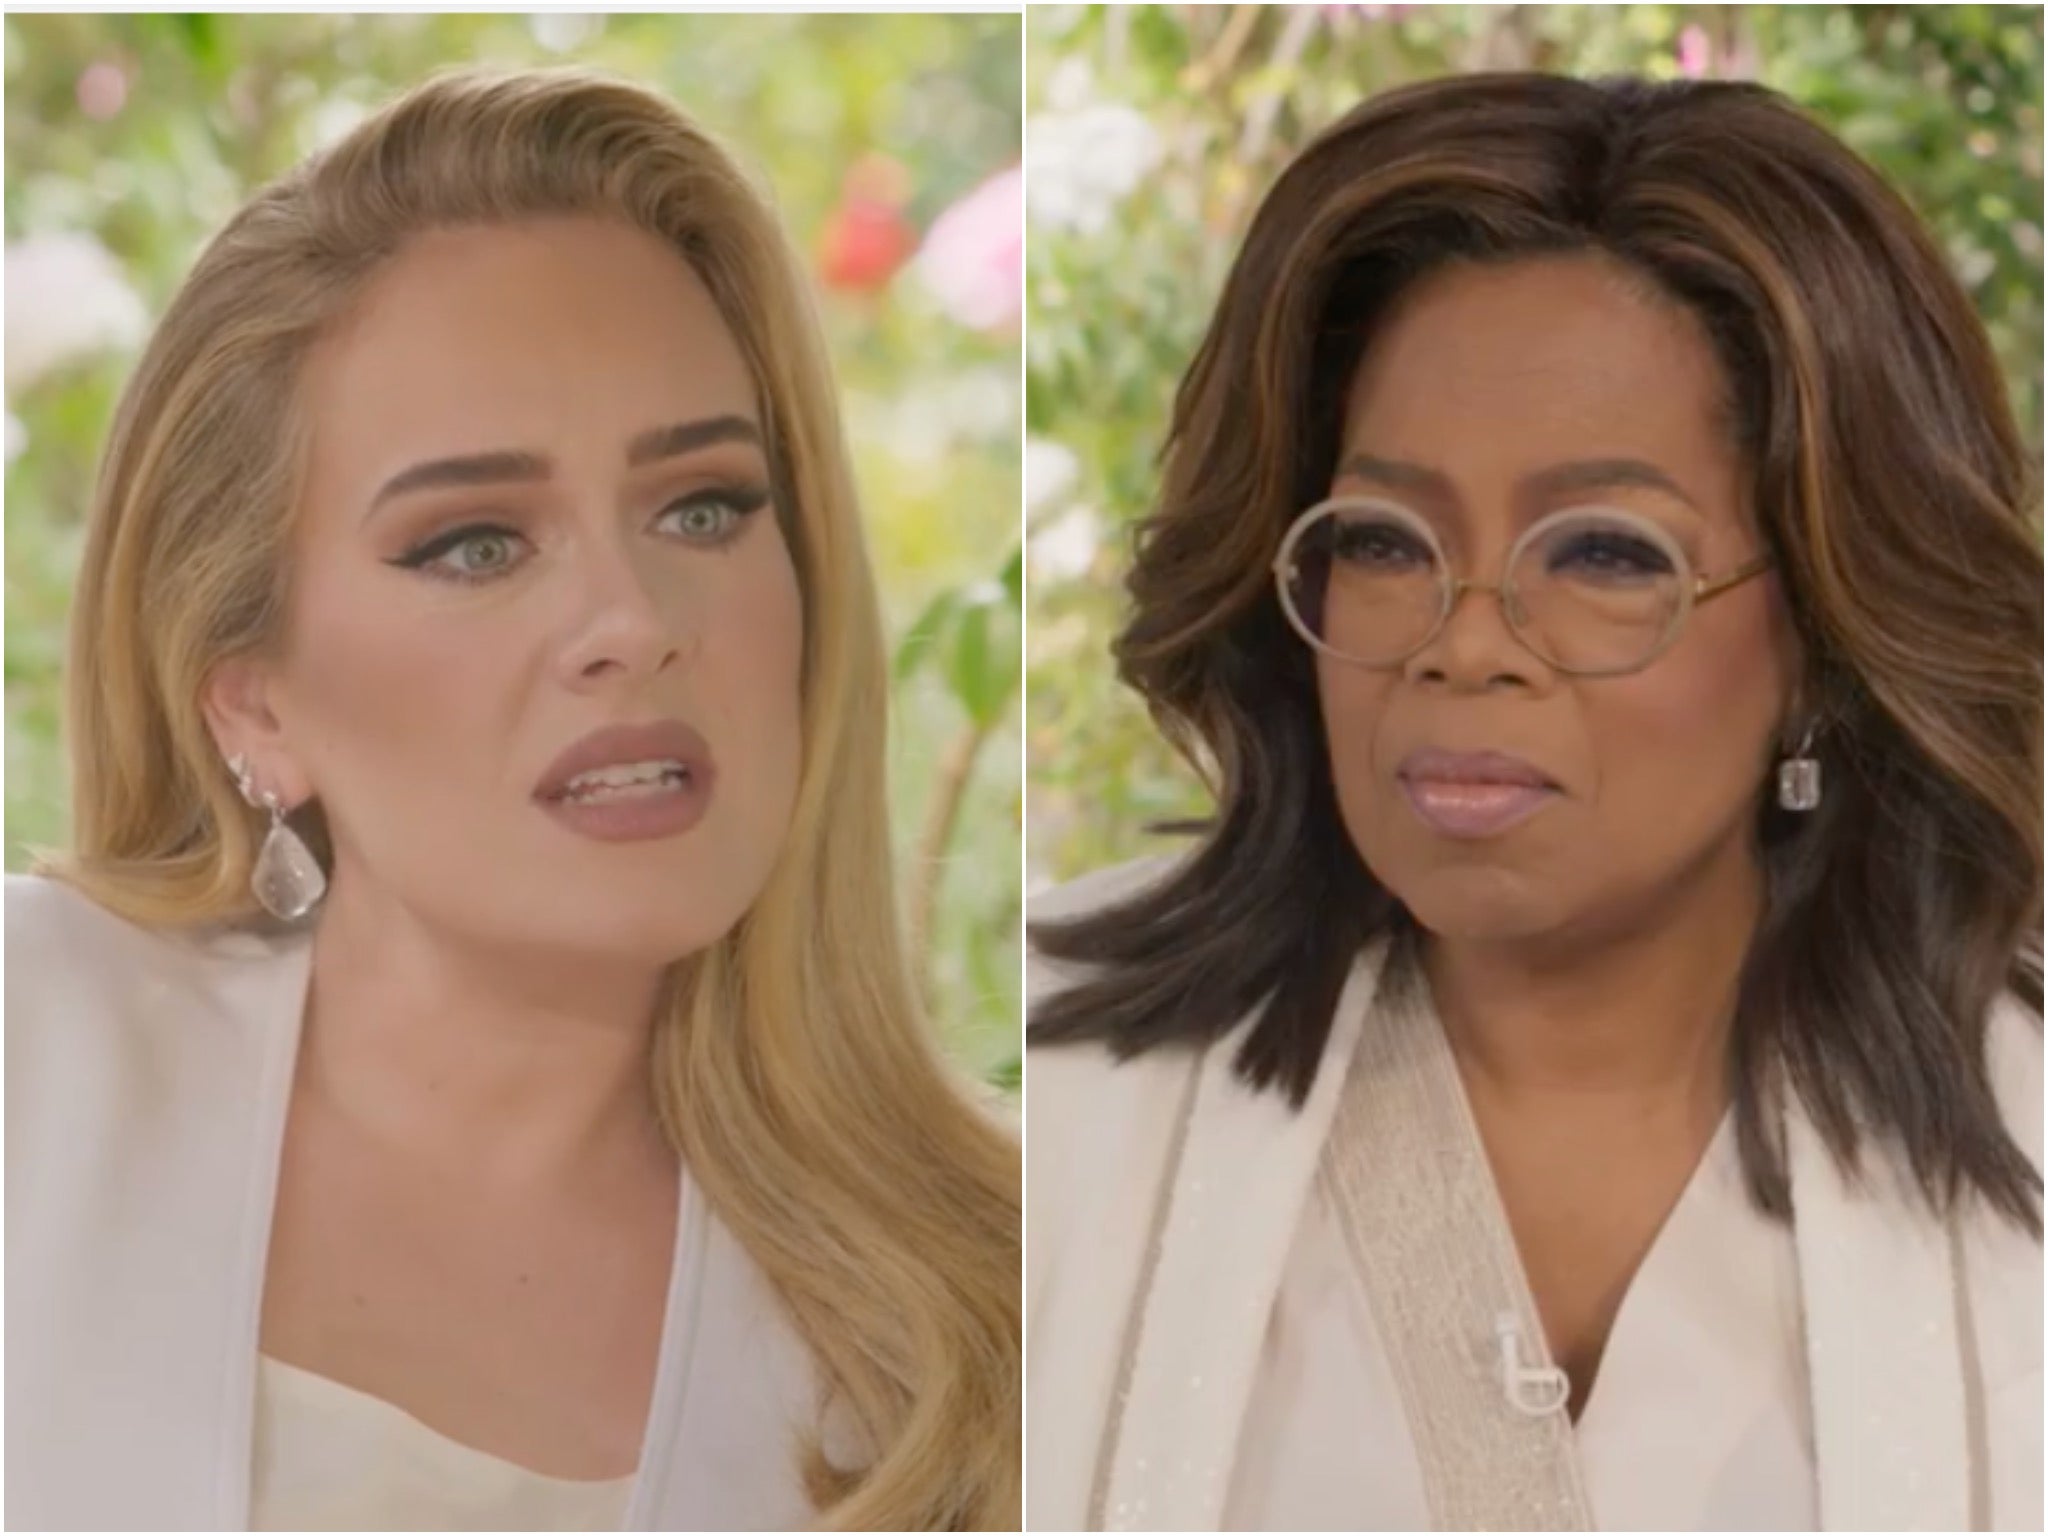 Adele is the latest British celebrity to be interviewed by Oprah Winfrey